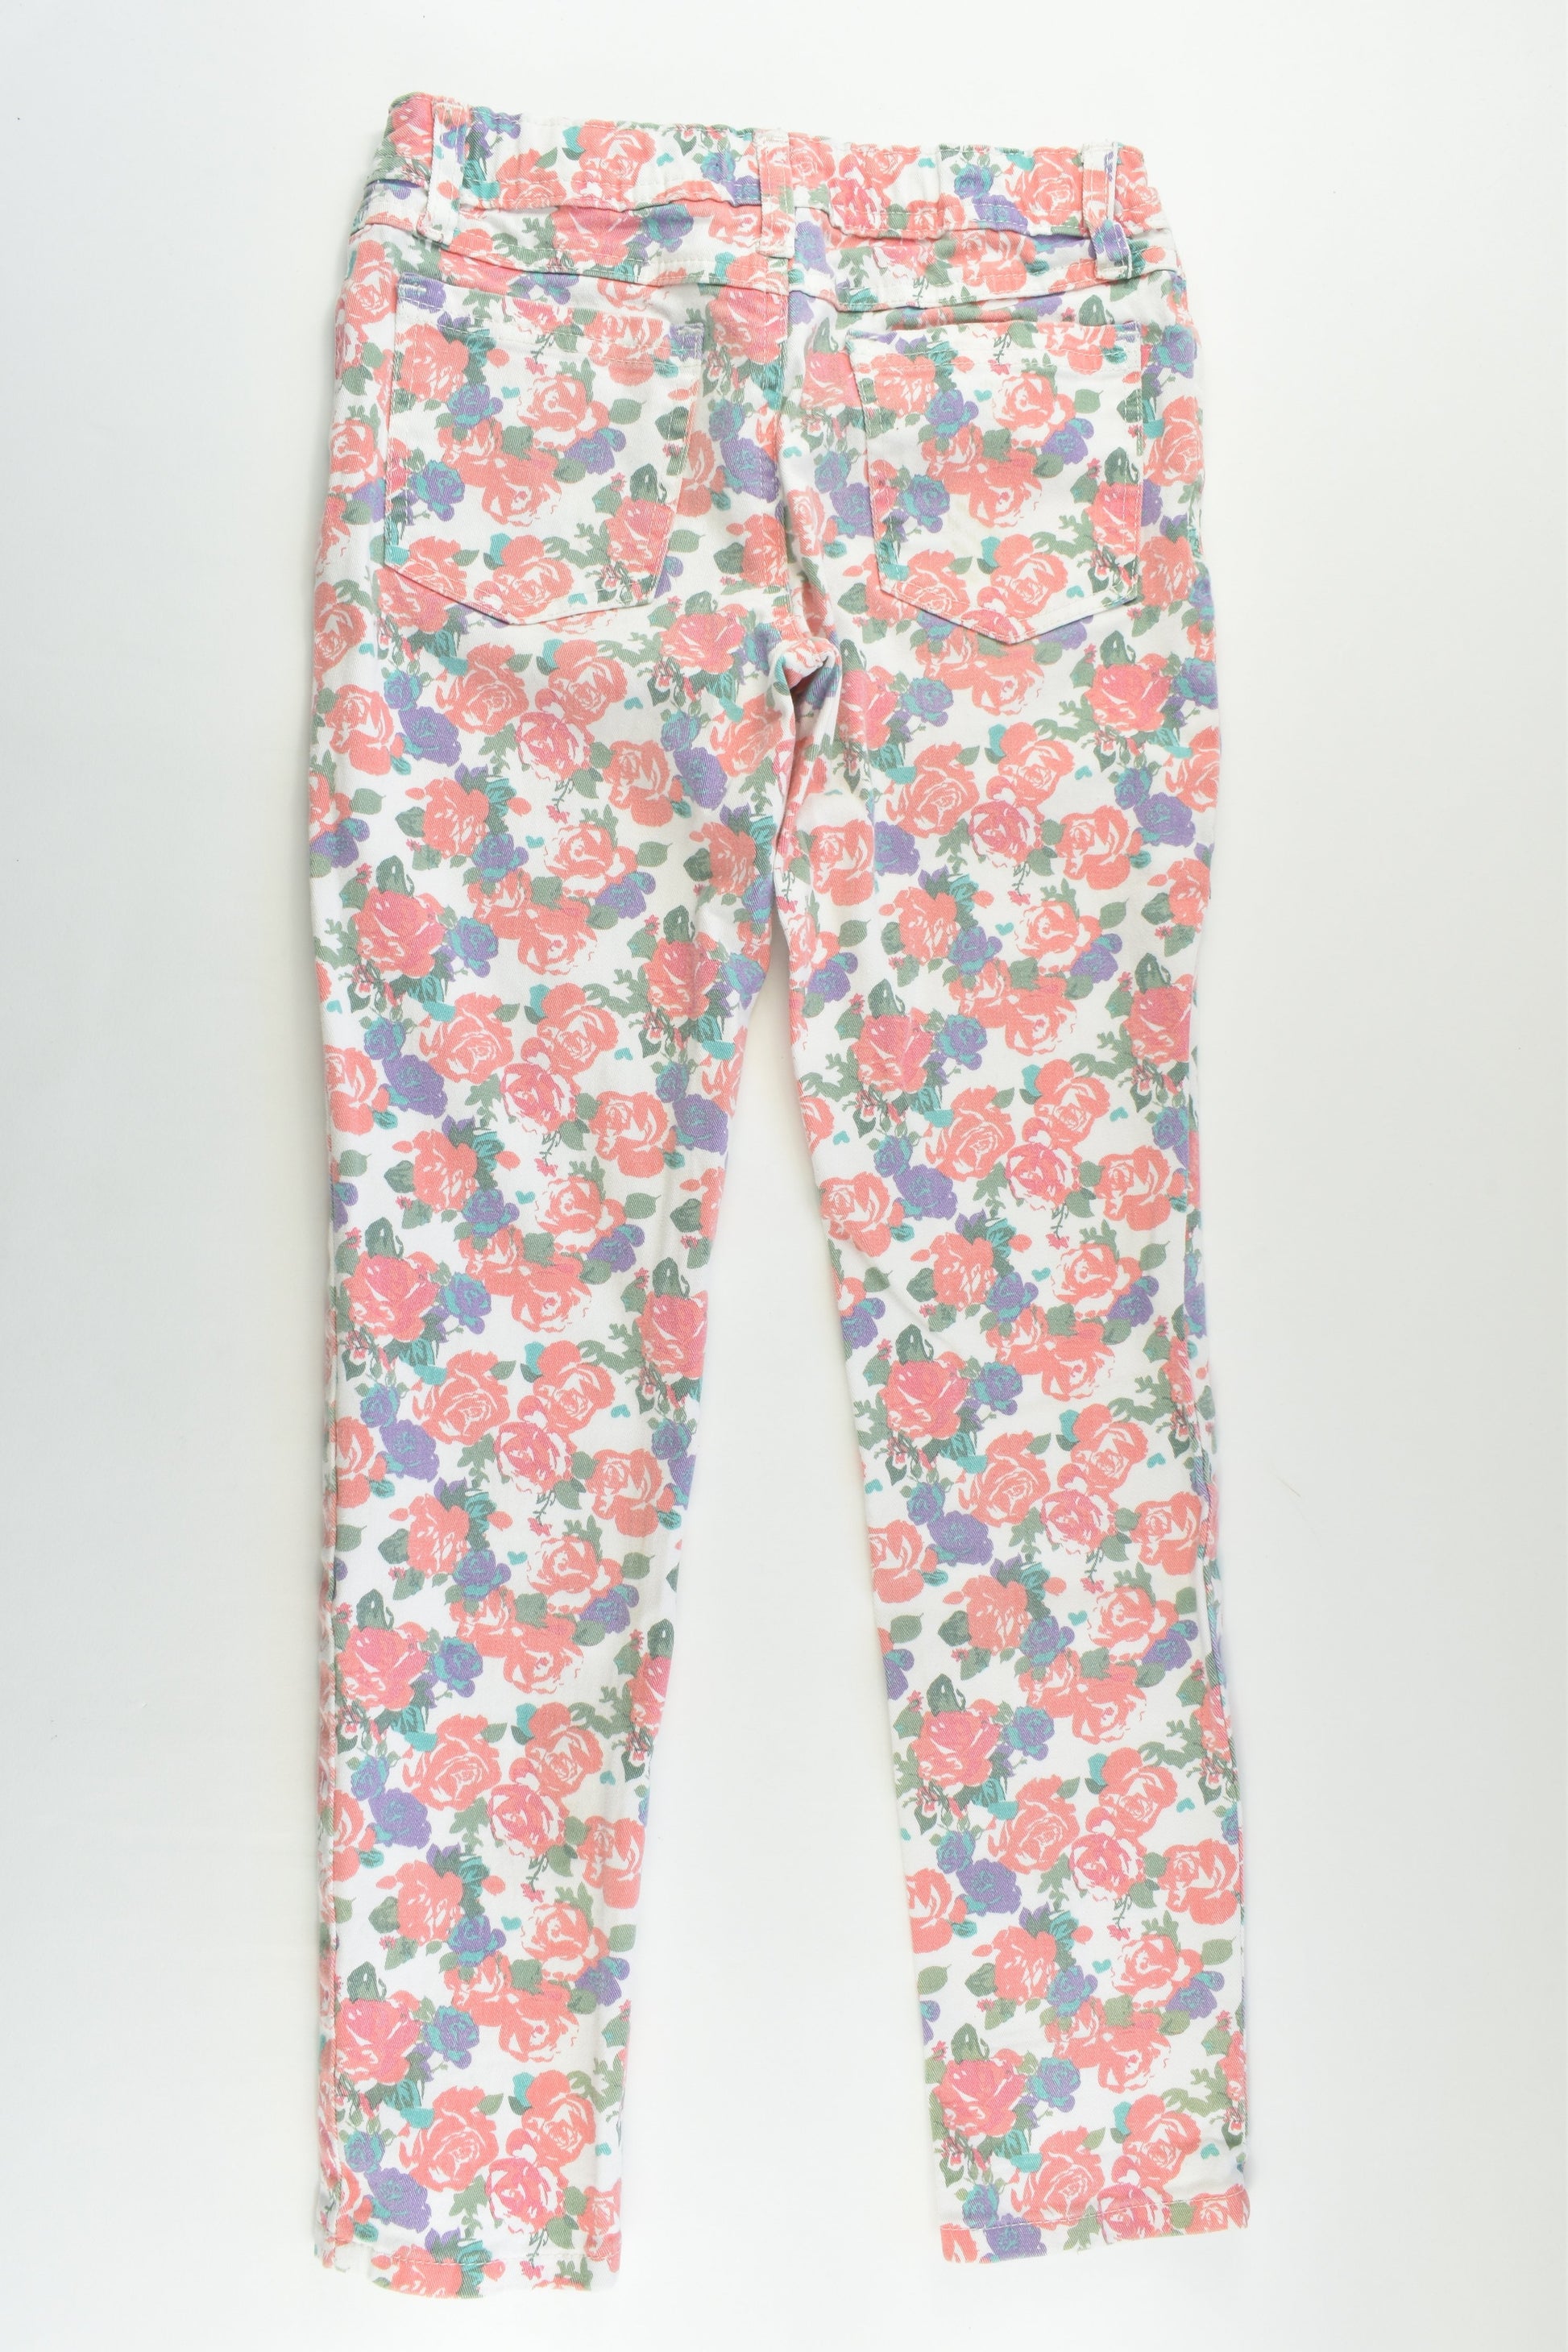 Target Size 9 Roses Stretchy Pants